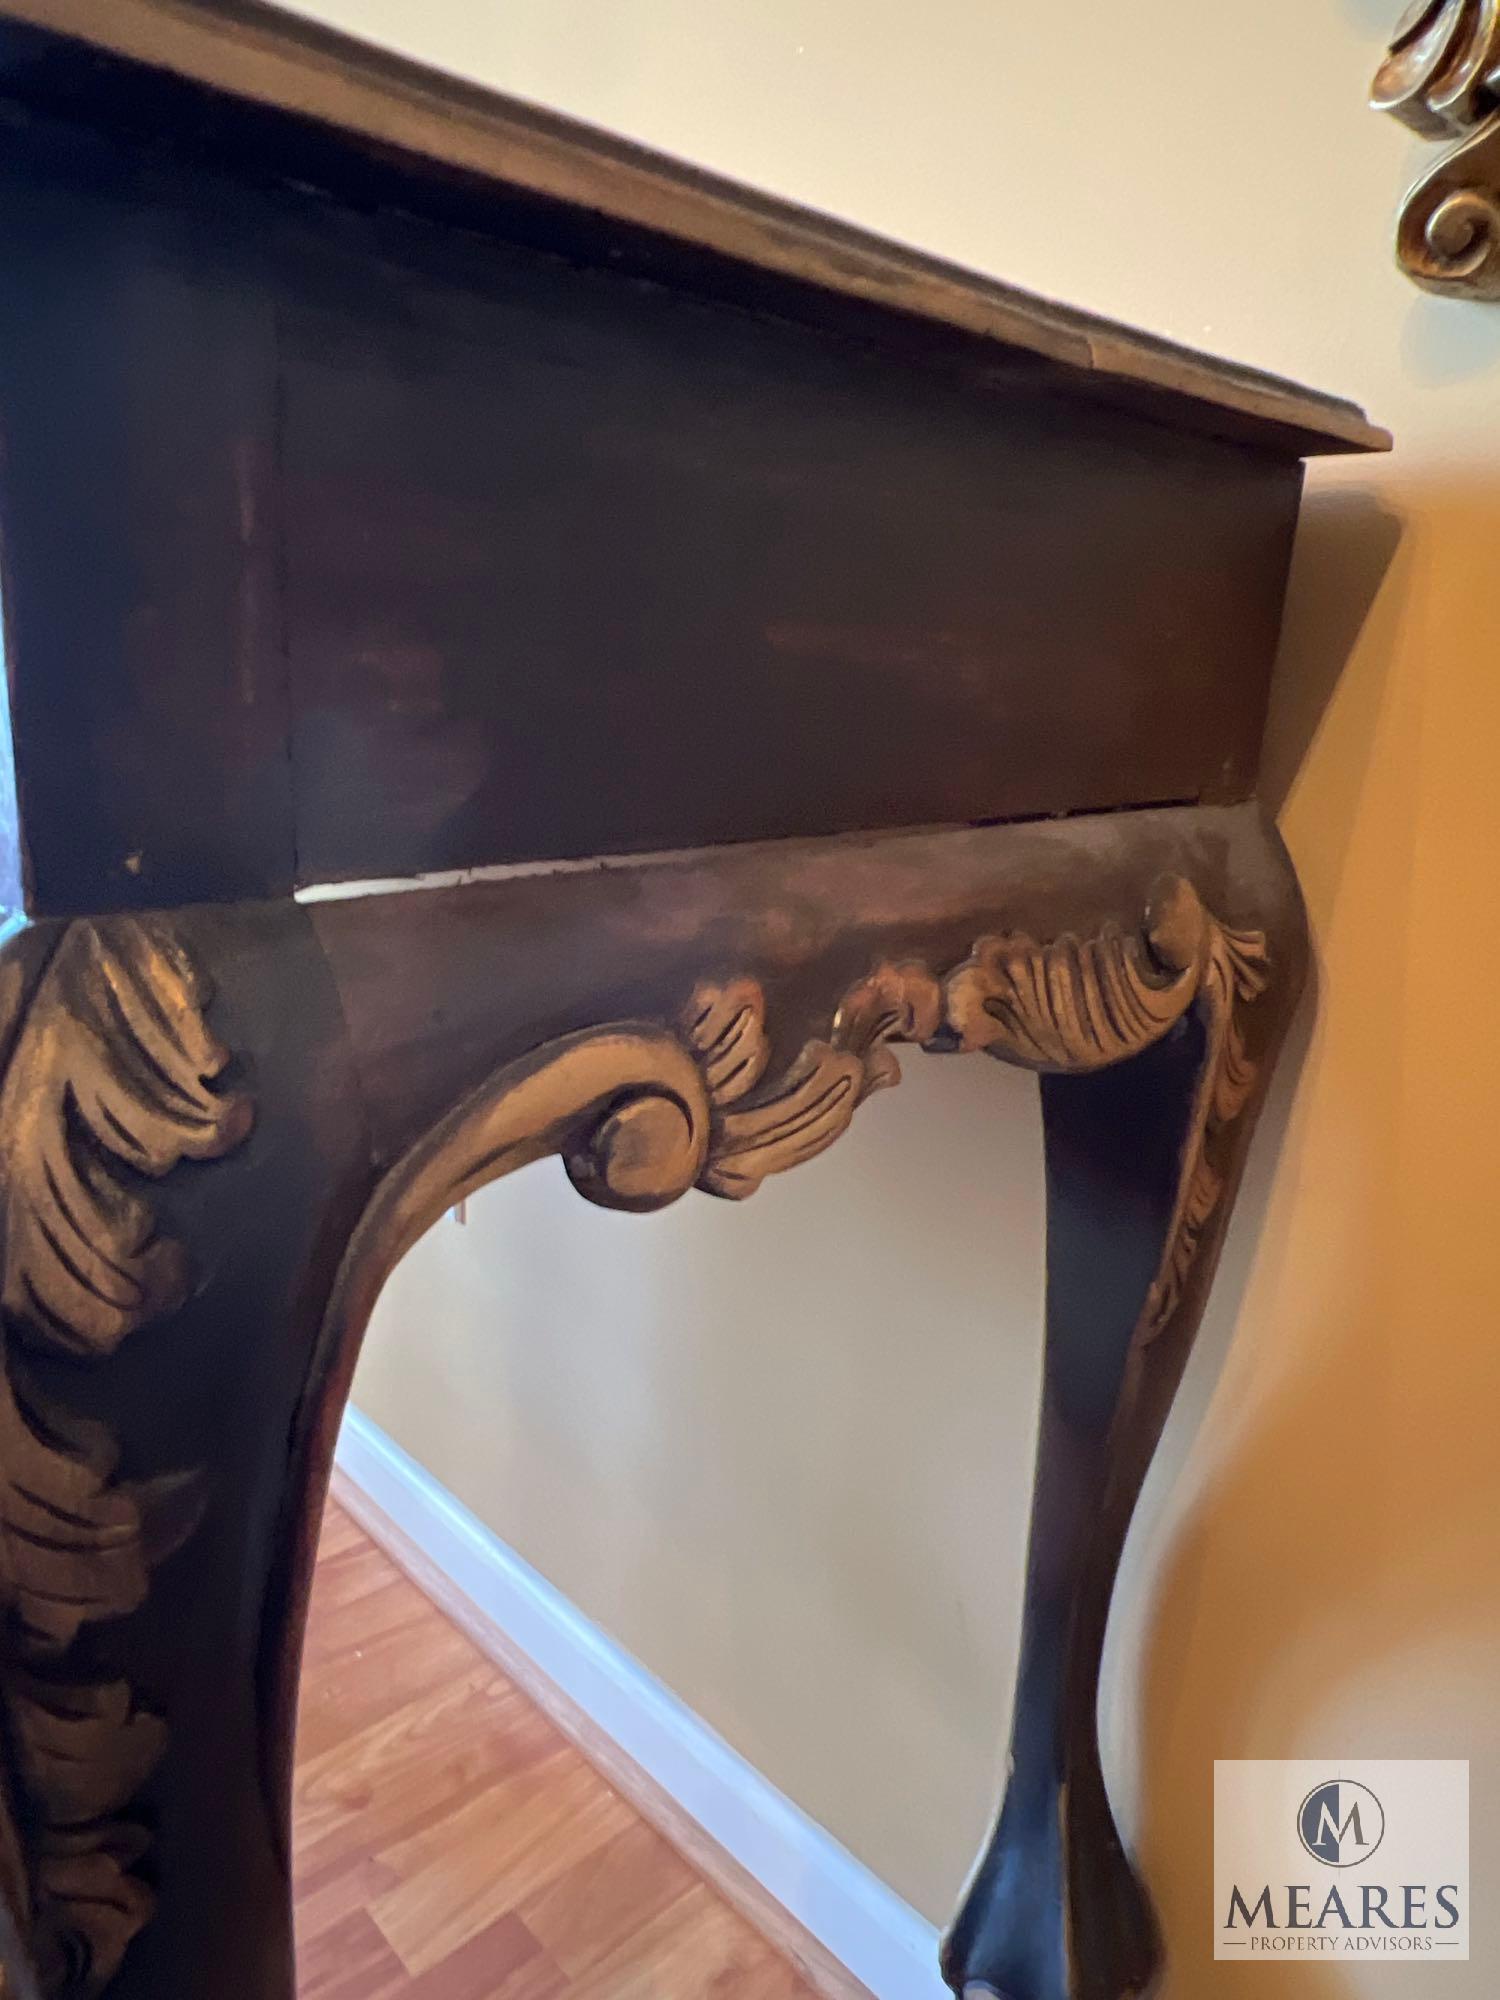 Two-Drawer Console Table with Carved Cabriole Legs